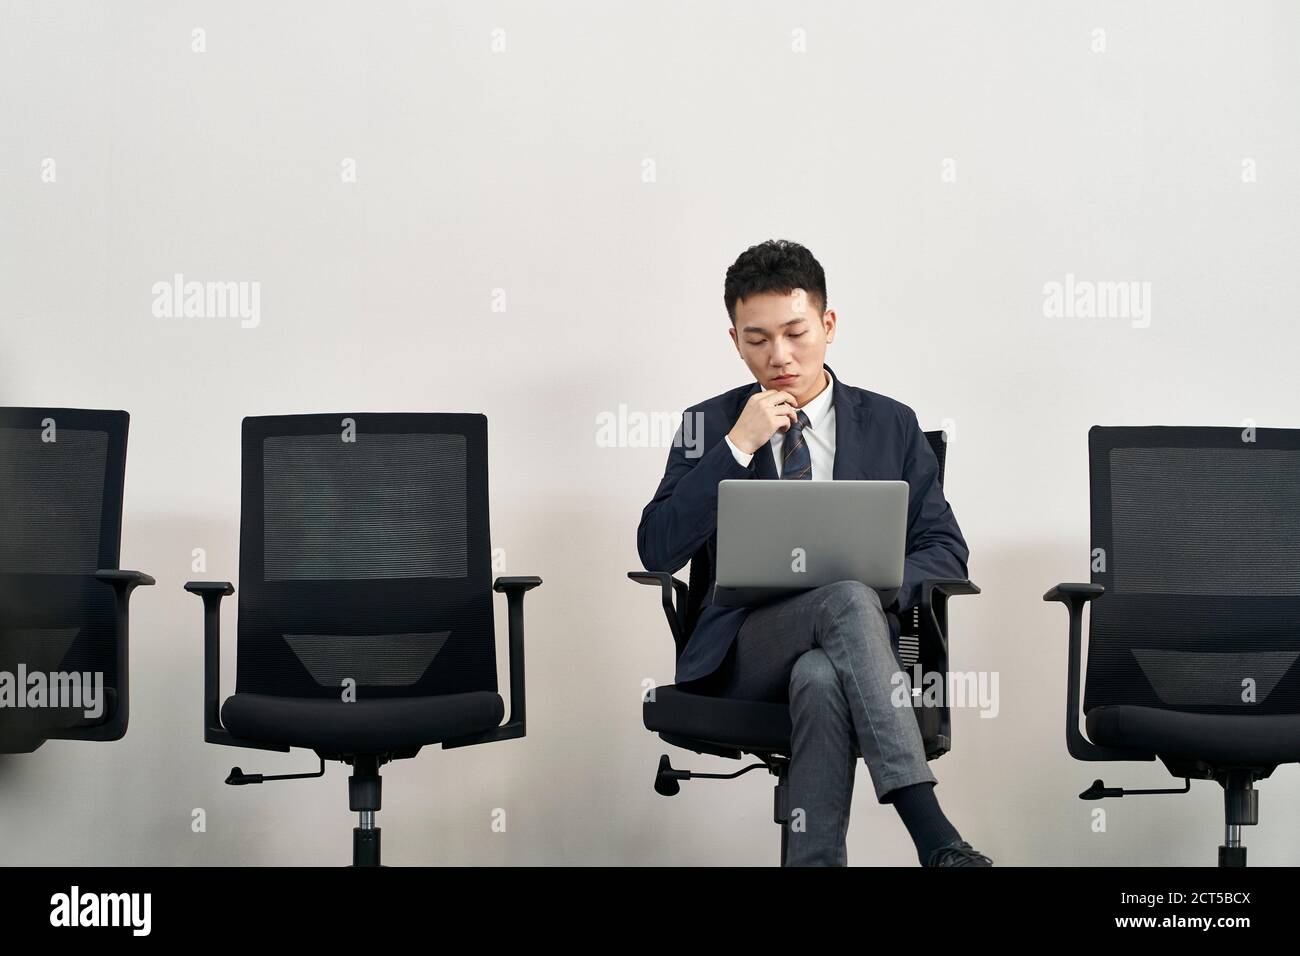 young asian job seeker sitting in chair preparing for interview using laptop computer while waiting in line Stock Photo